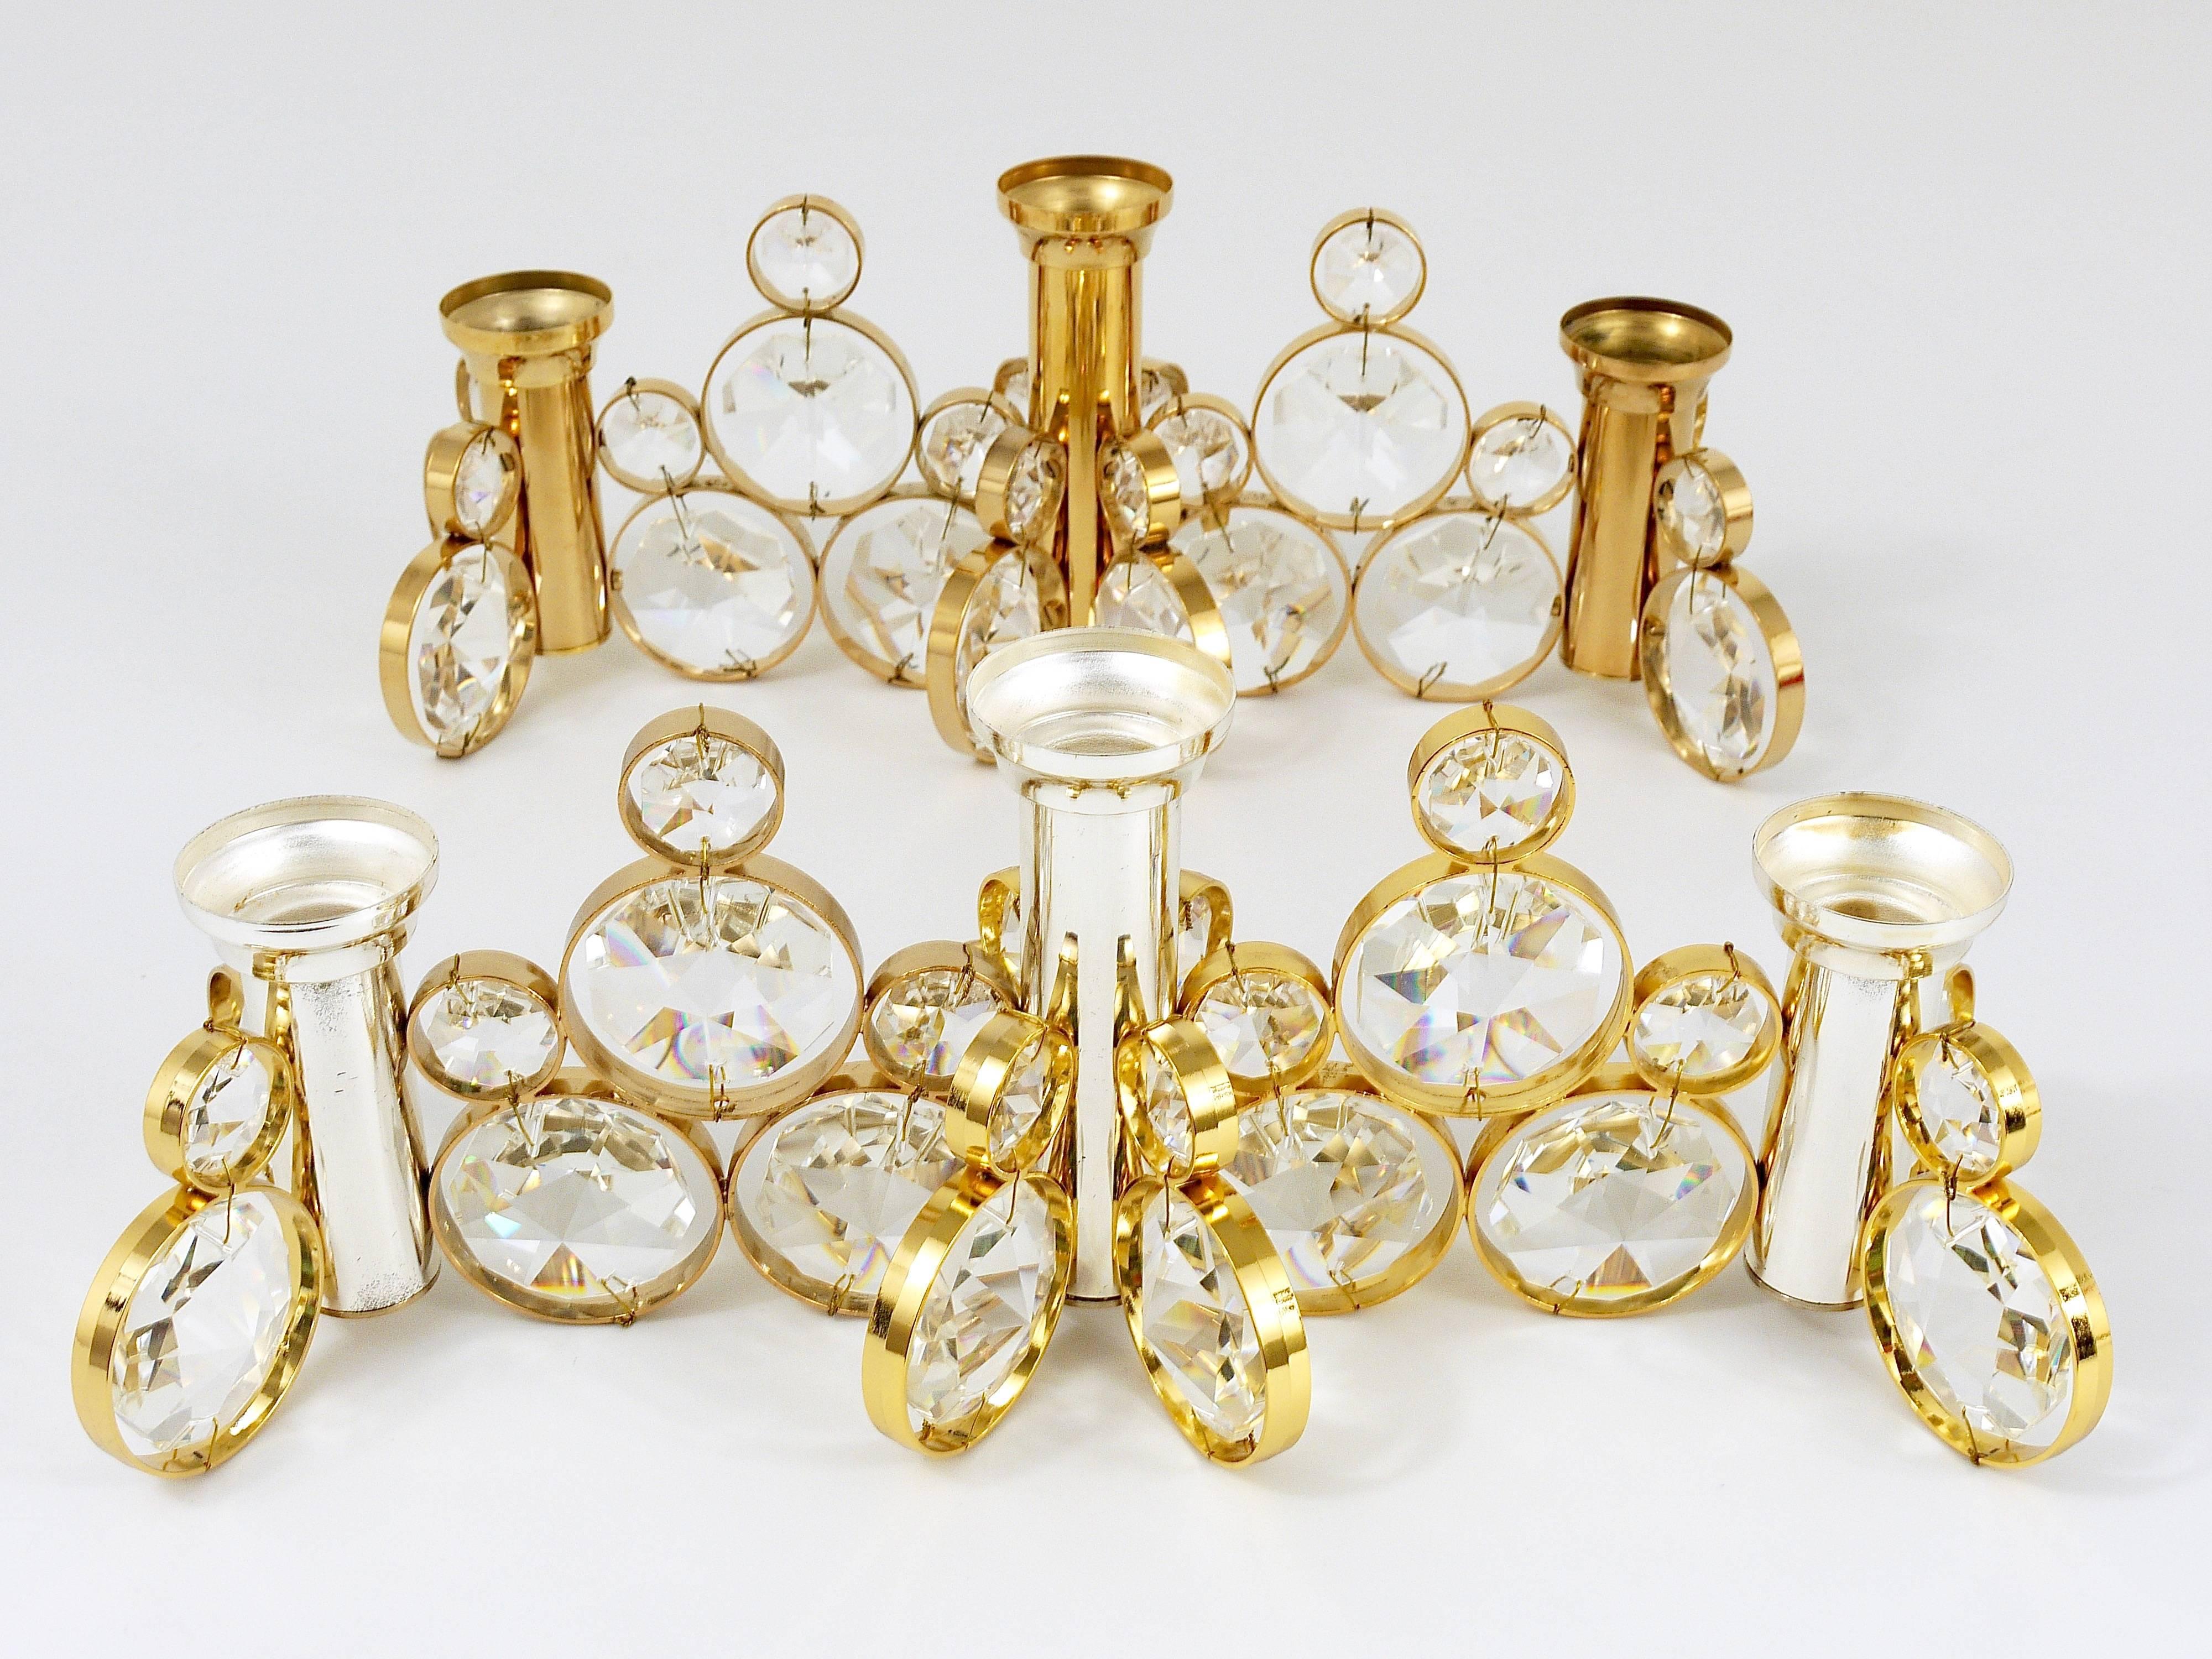 Up to ten beautiful candle holders in the style of Gaetano Sciolari. Manufactured in the 1970s by Palwa Germany. Made of gold-plated brass with huge faceted crystals. In excellent condition, new old stock. There are ten identical candle holders